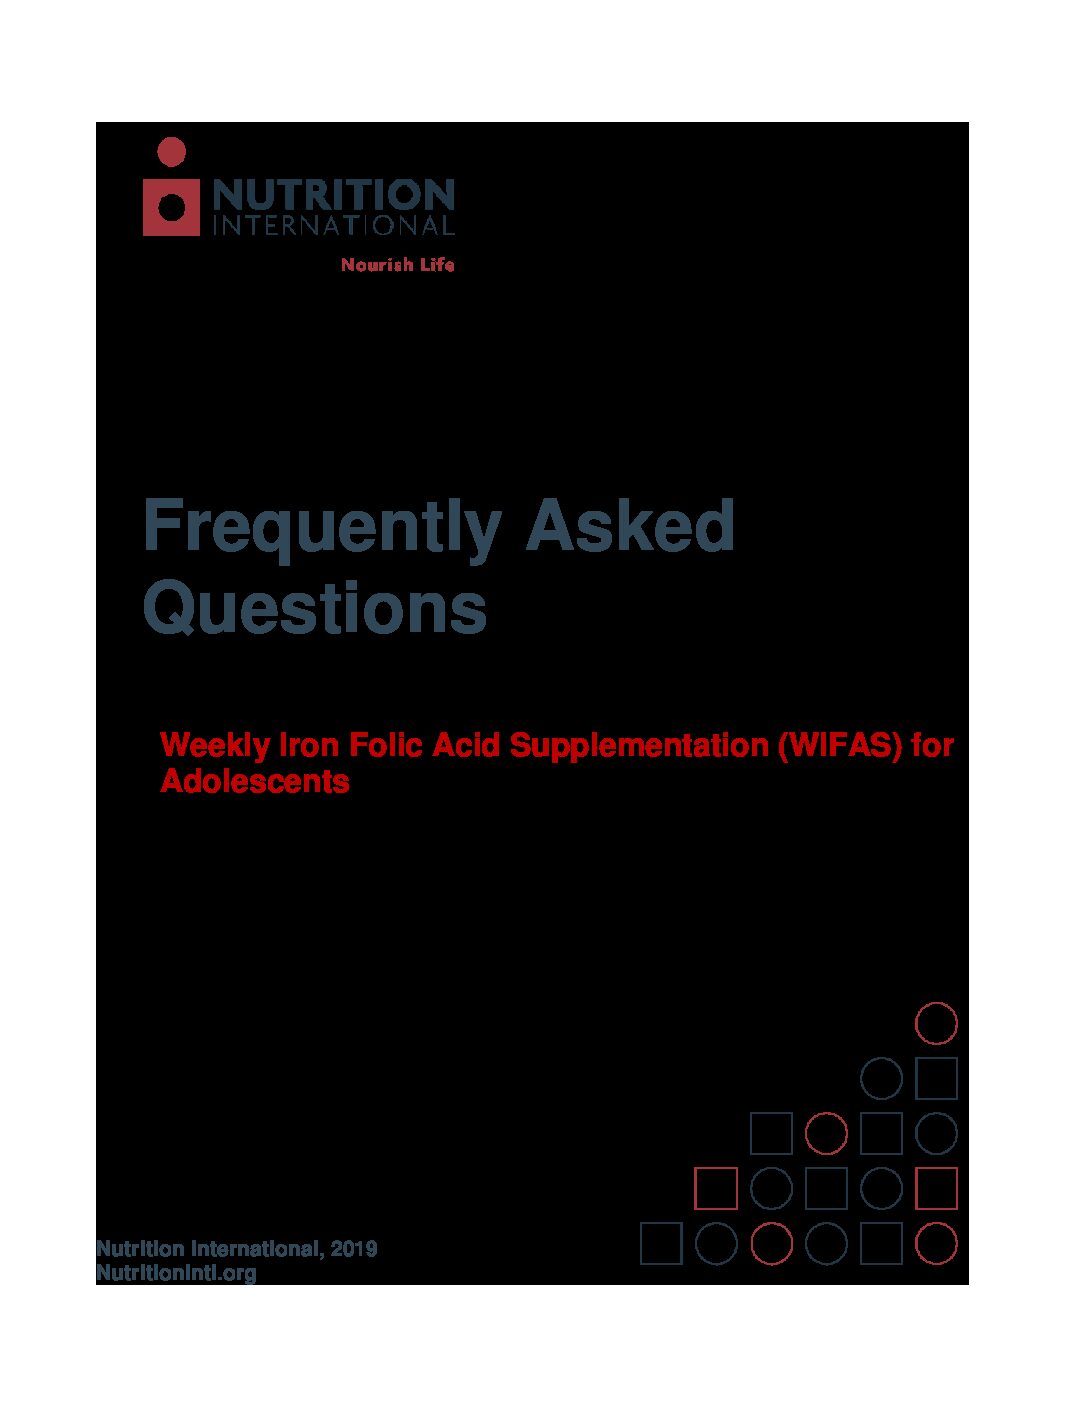 Weekly Iron Folic Acid Supplementation (WIFAS) for Adolescents – FAQs thumbnail